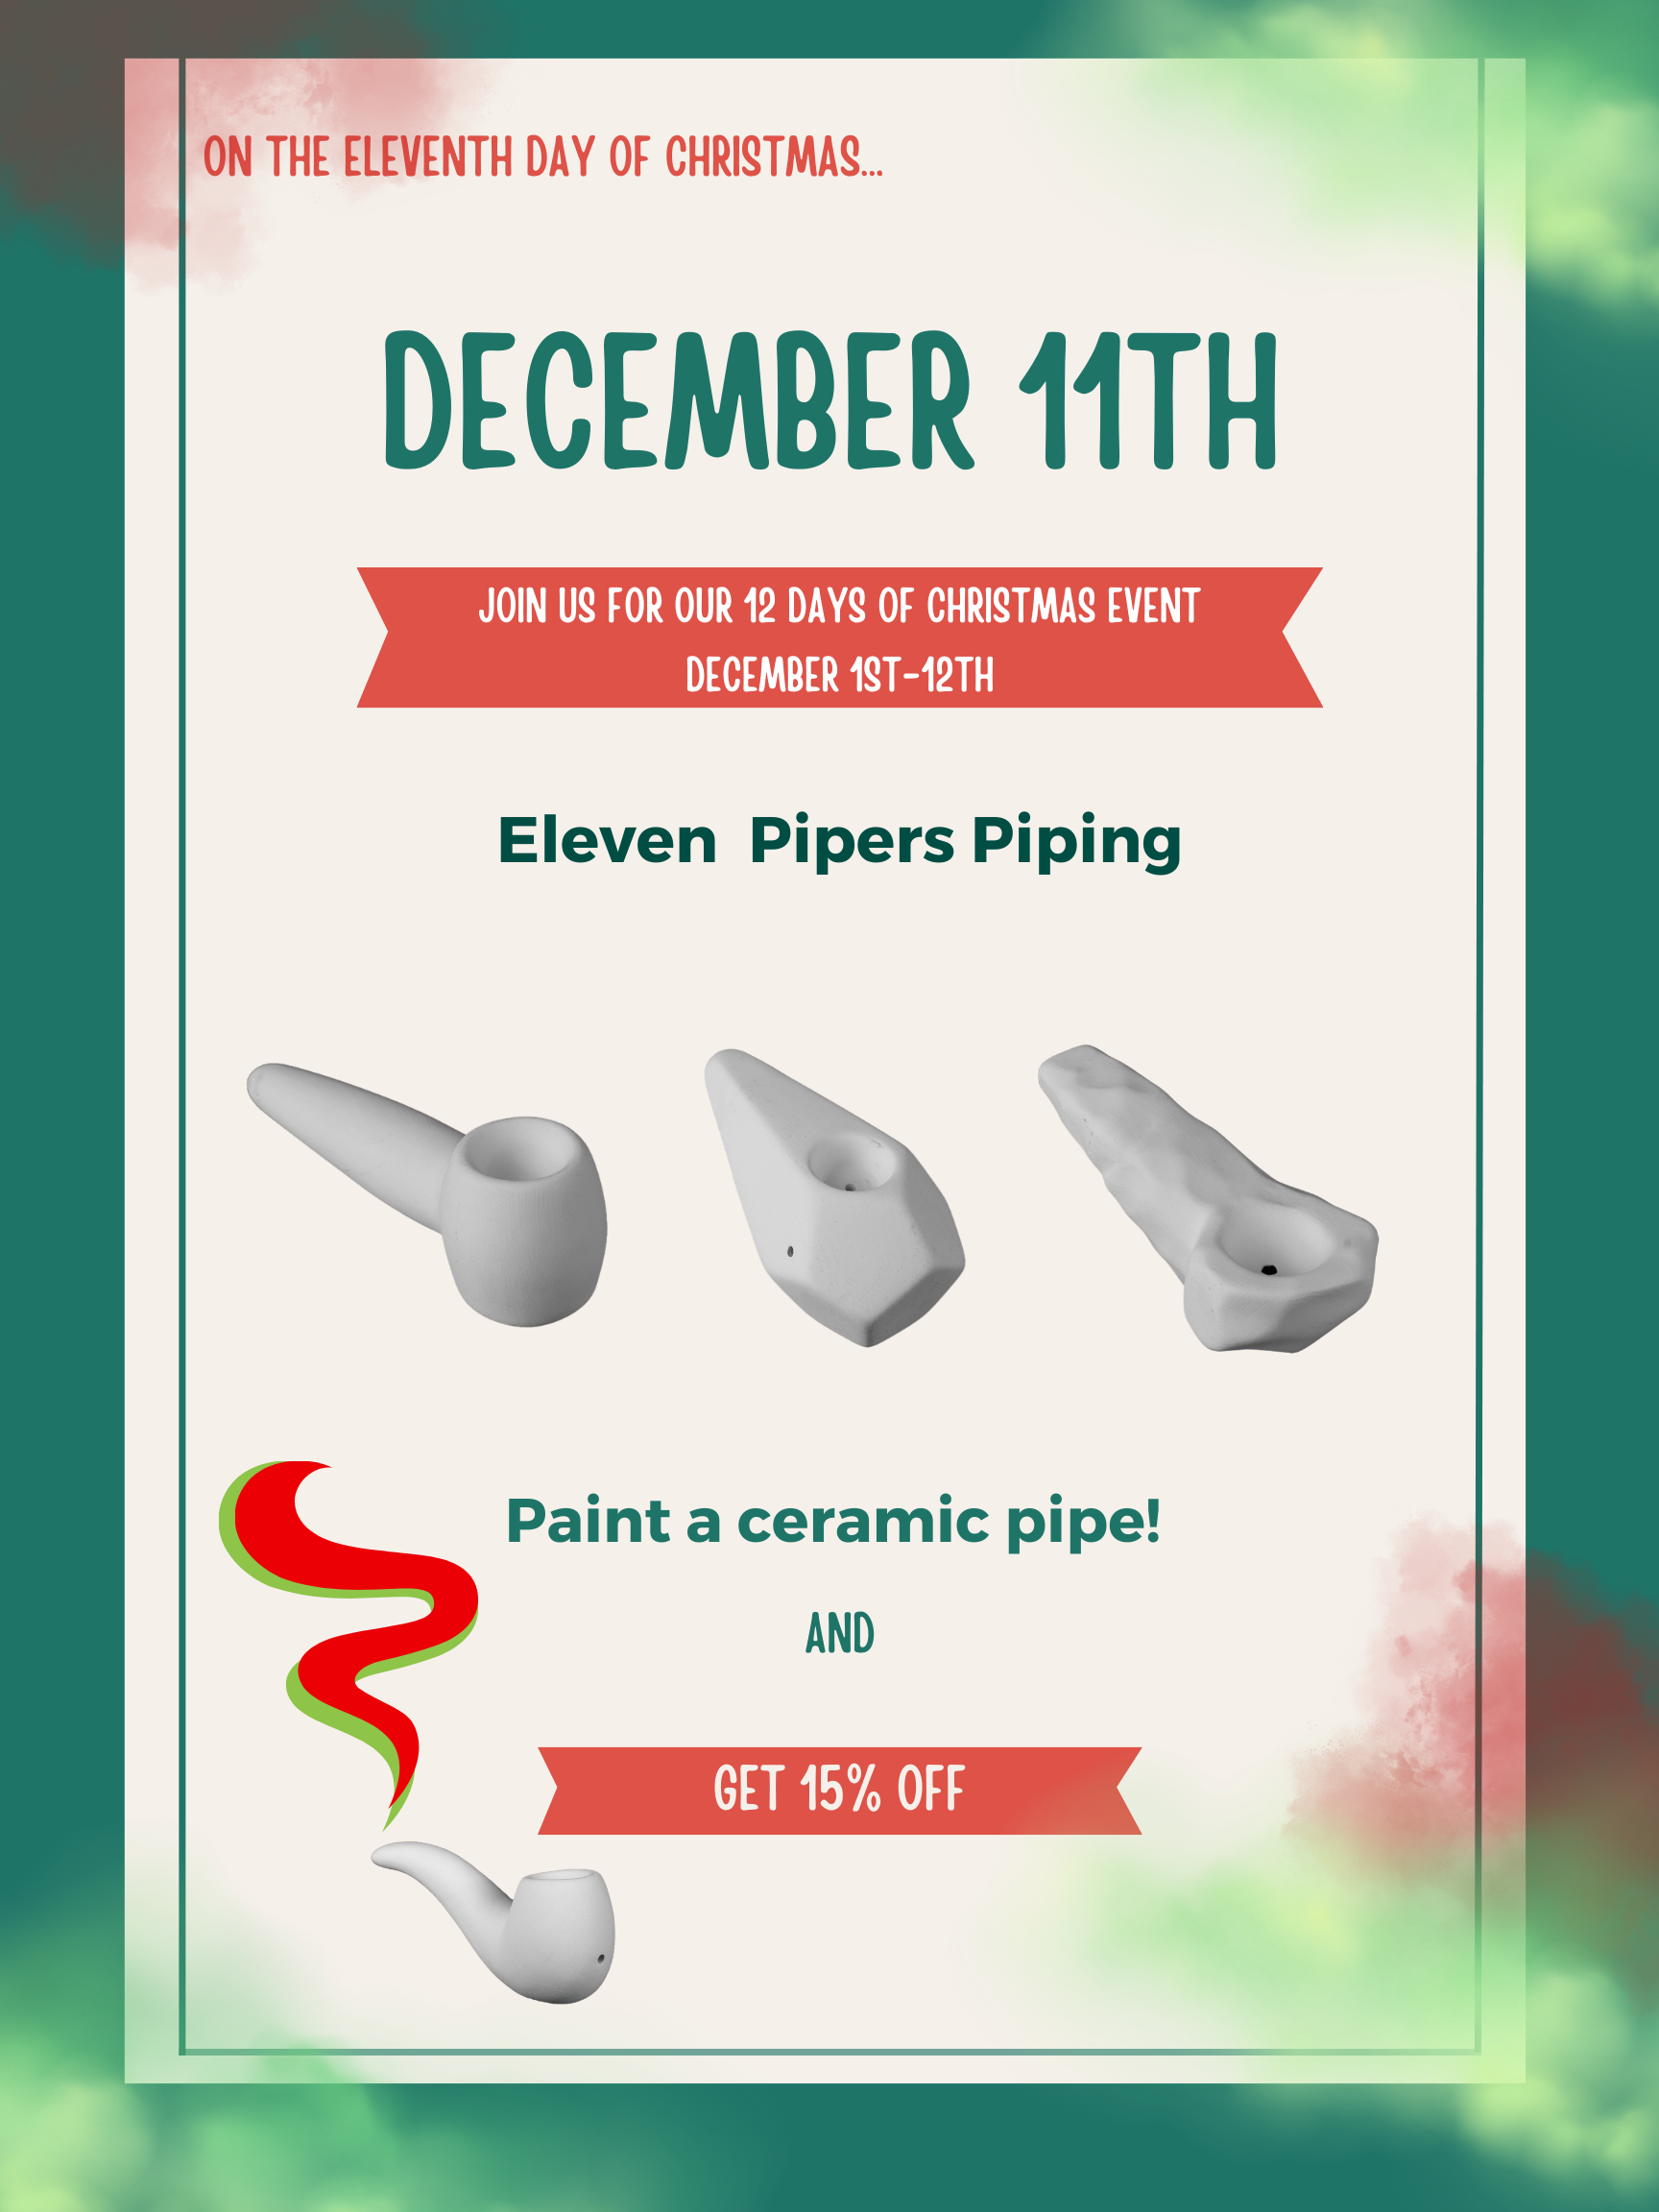 On The Eleventh Day Of Christmas...Eleven Pipers Piping